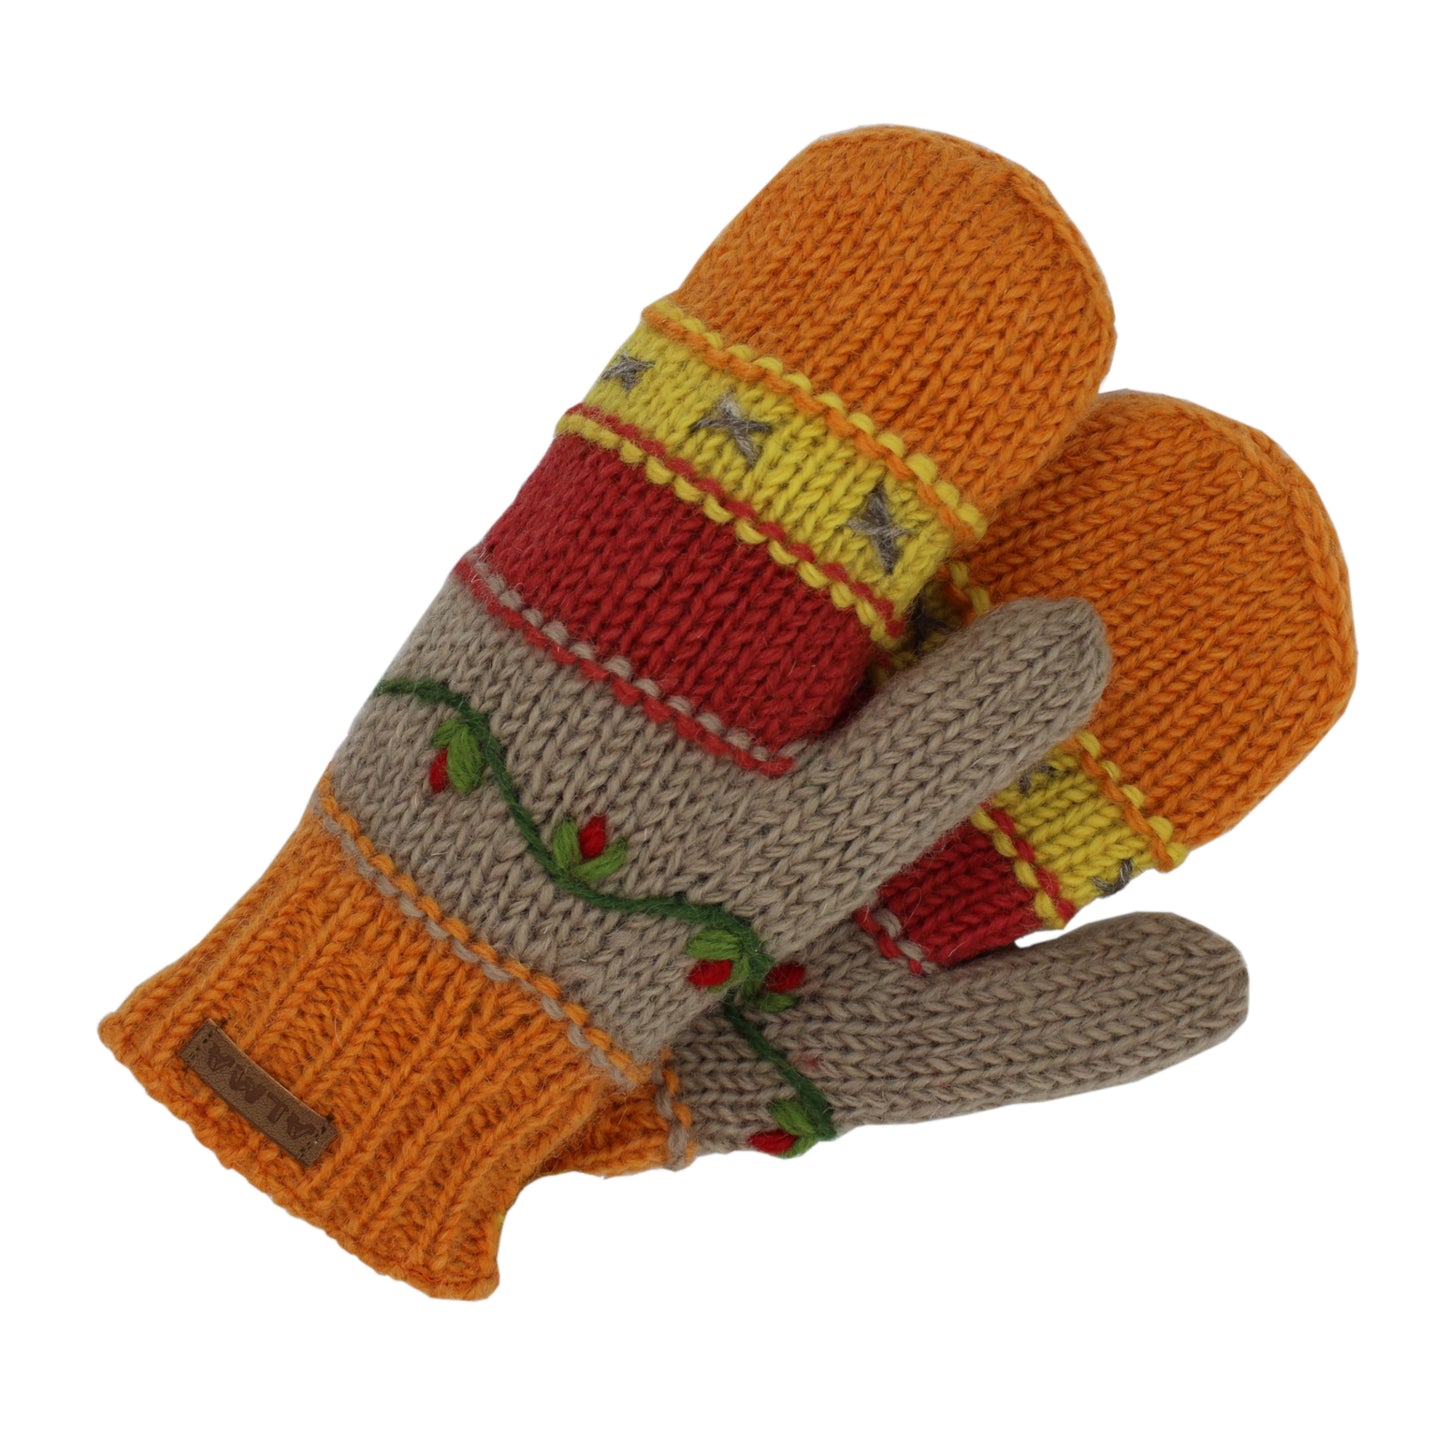 Striped Embroidered Mitts